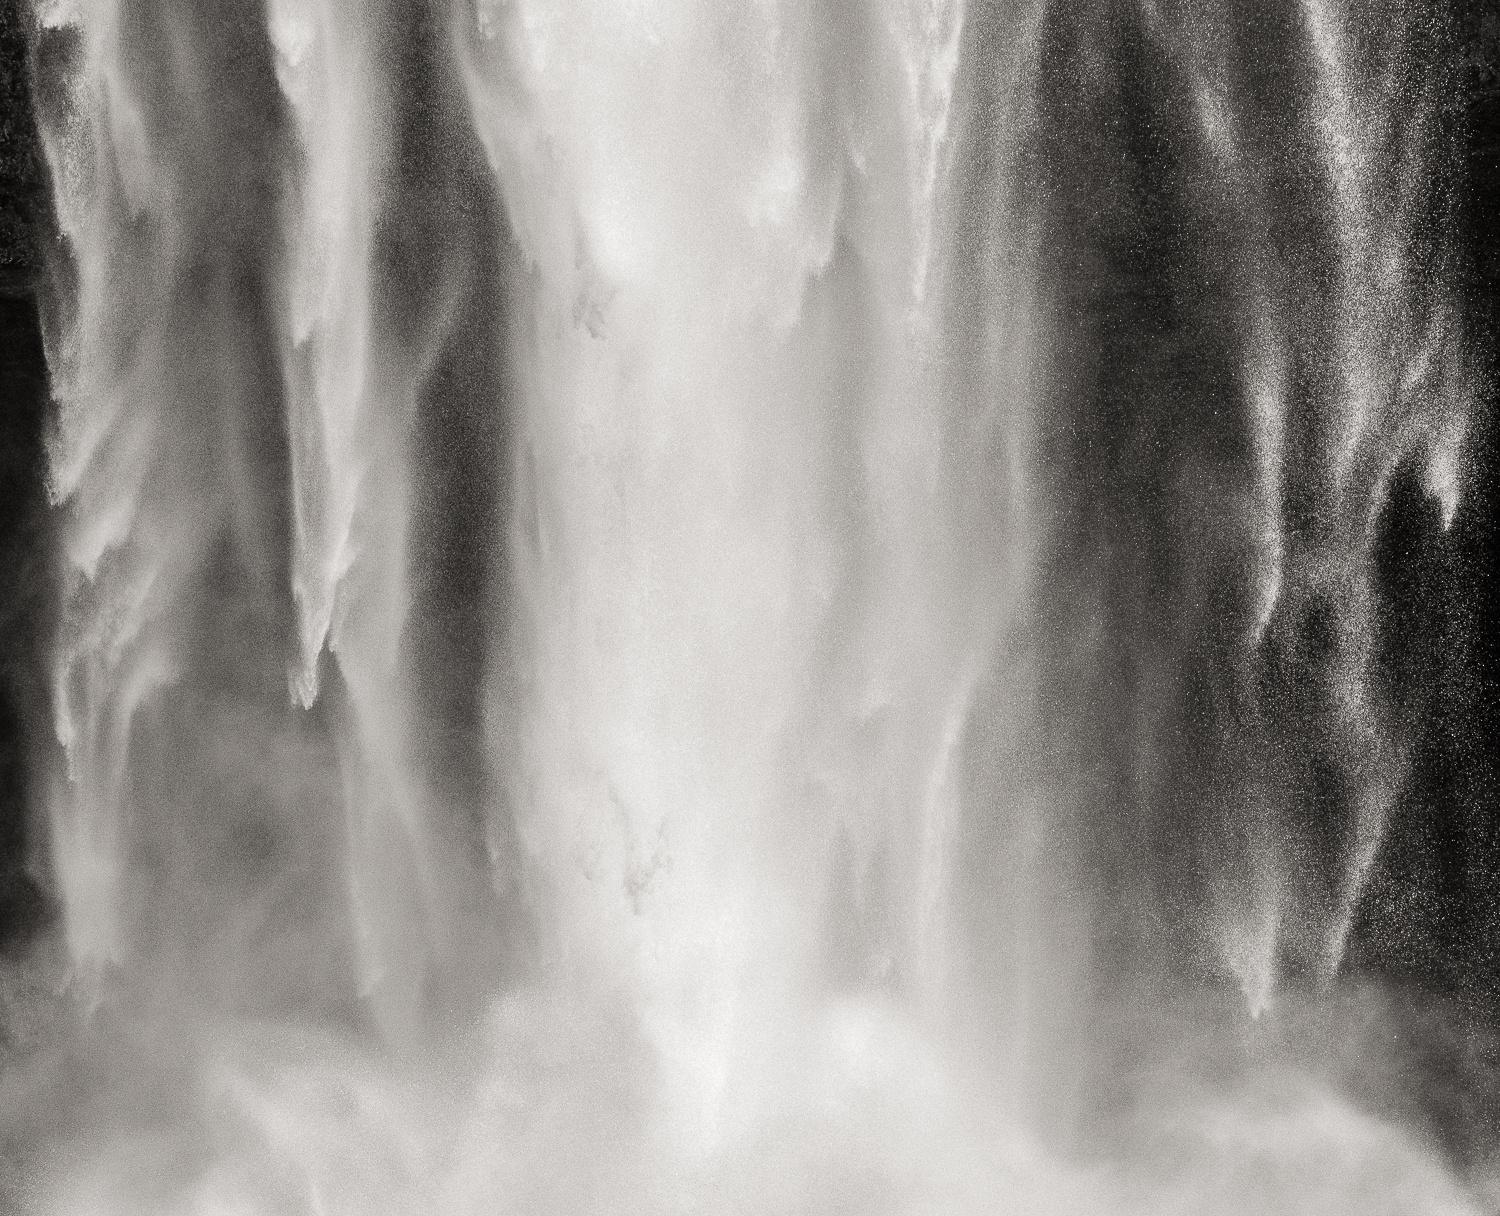 Jeffrey Conley Black and White Photograph - Falling Water, Iceland, 2017